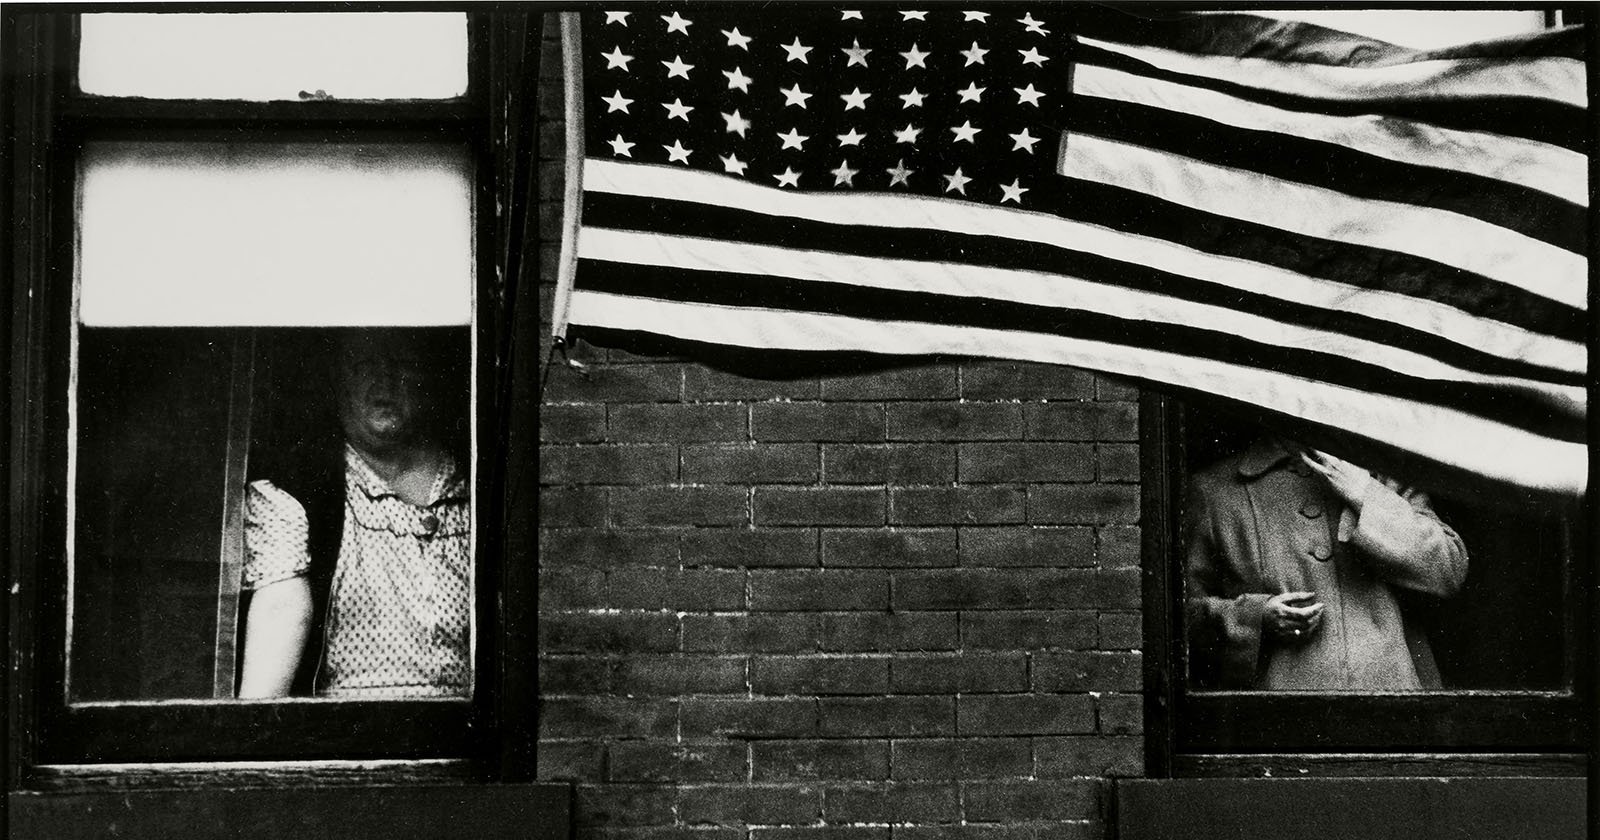 Huge Collection of Robert Frank’s Photos Valued at Nearly $3 Million